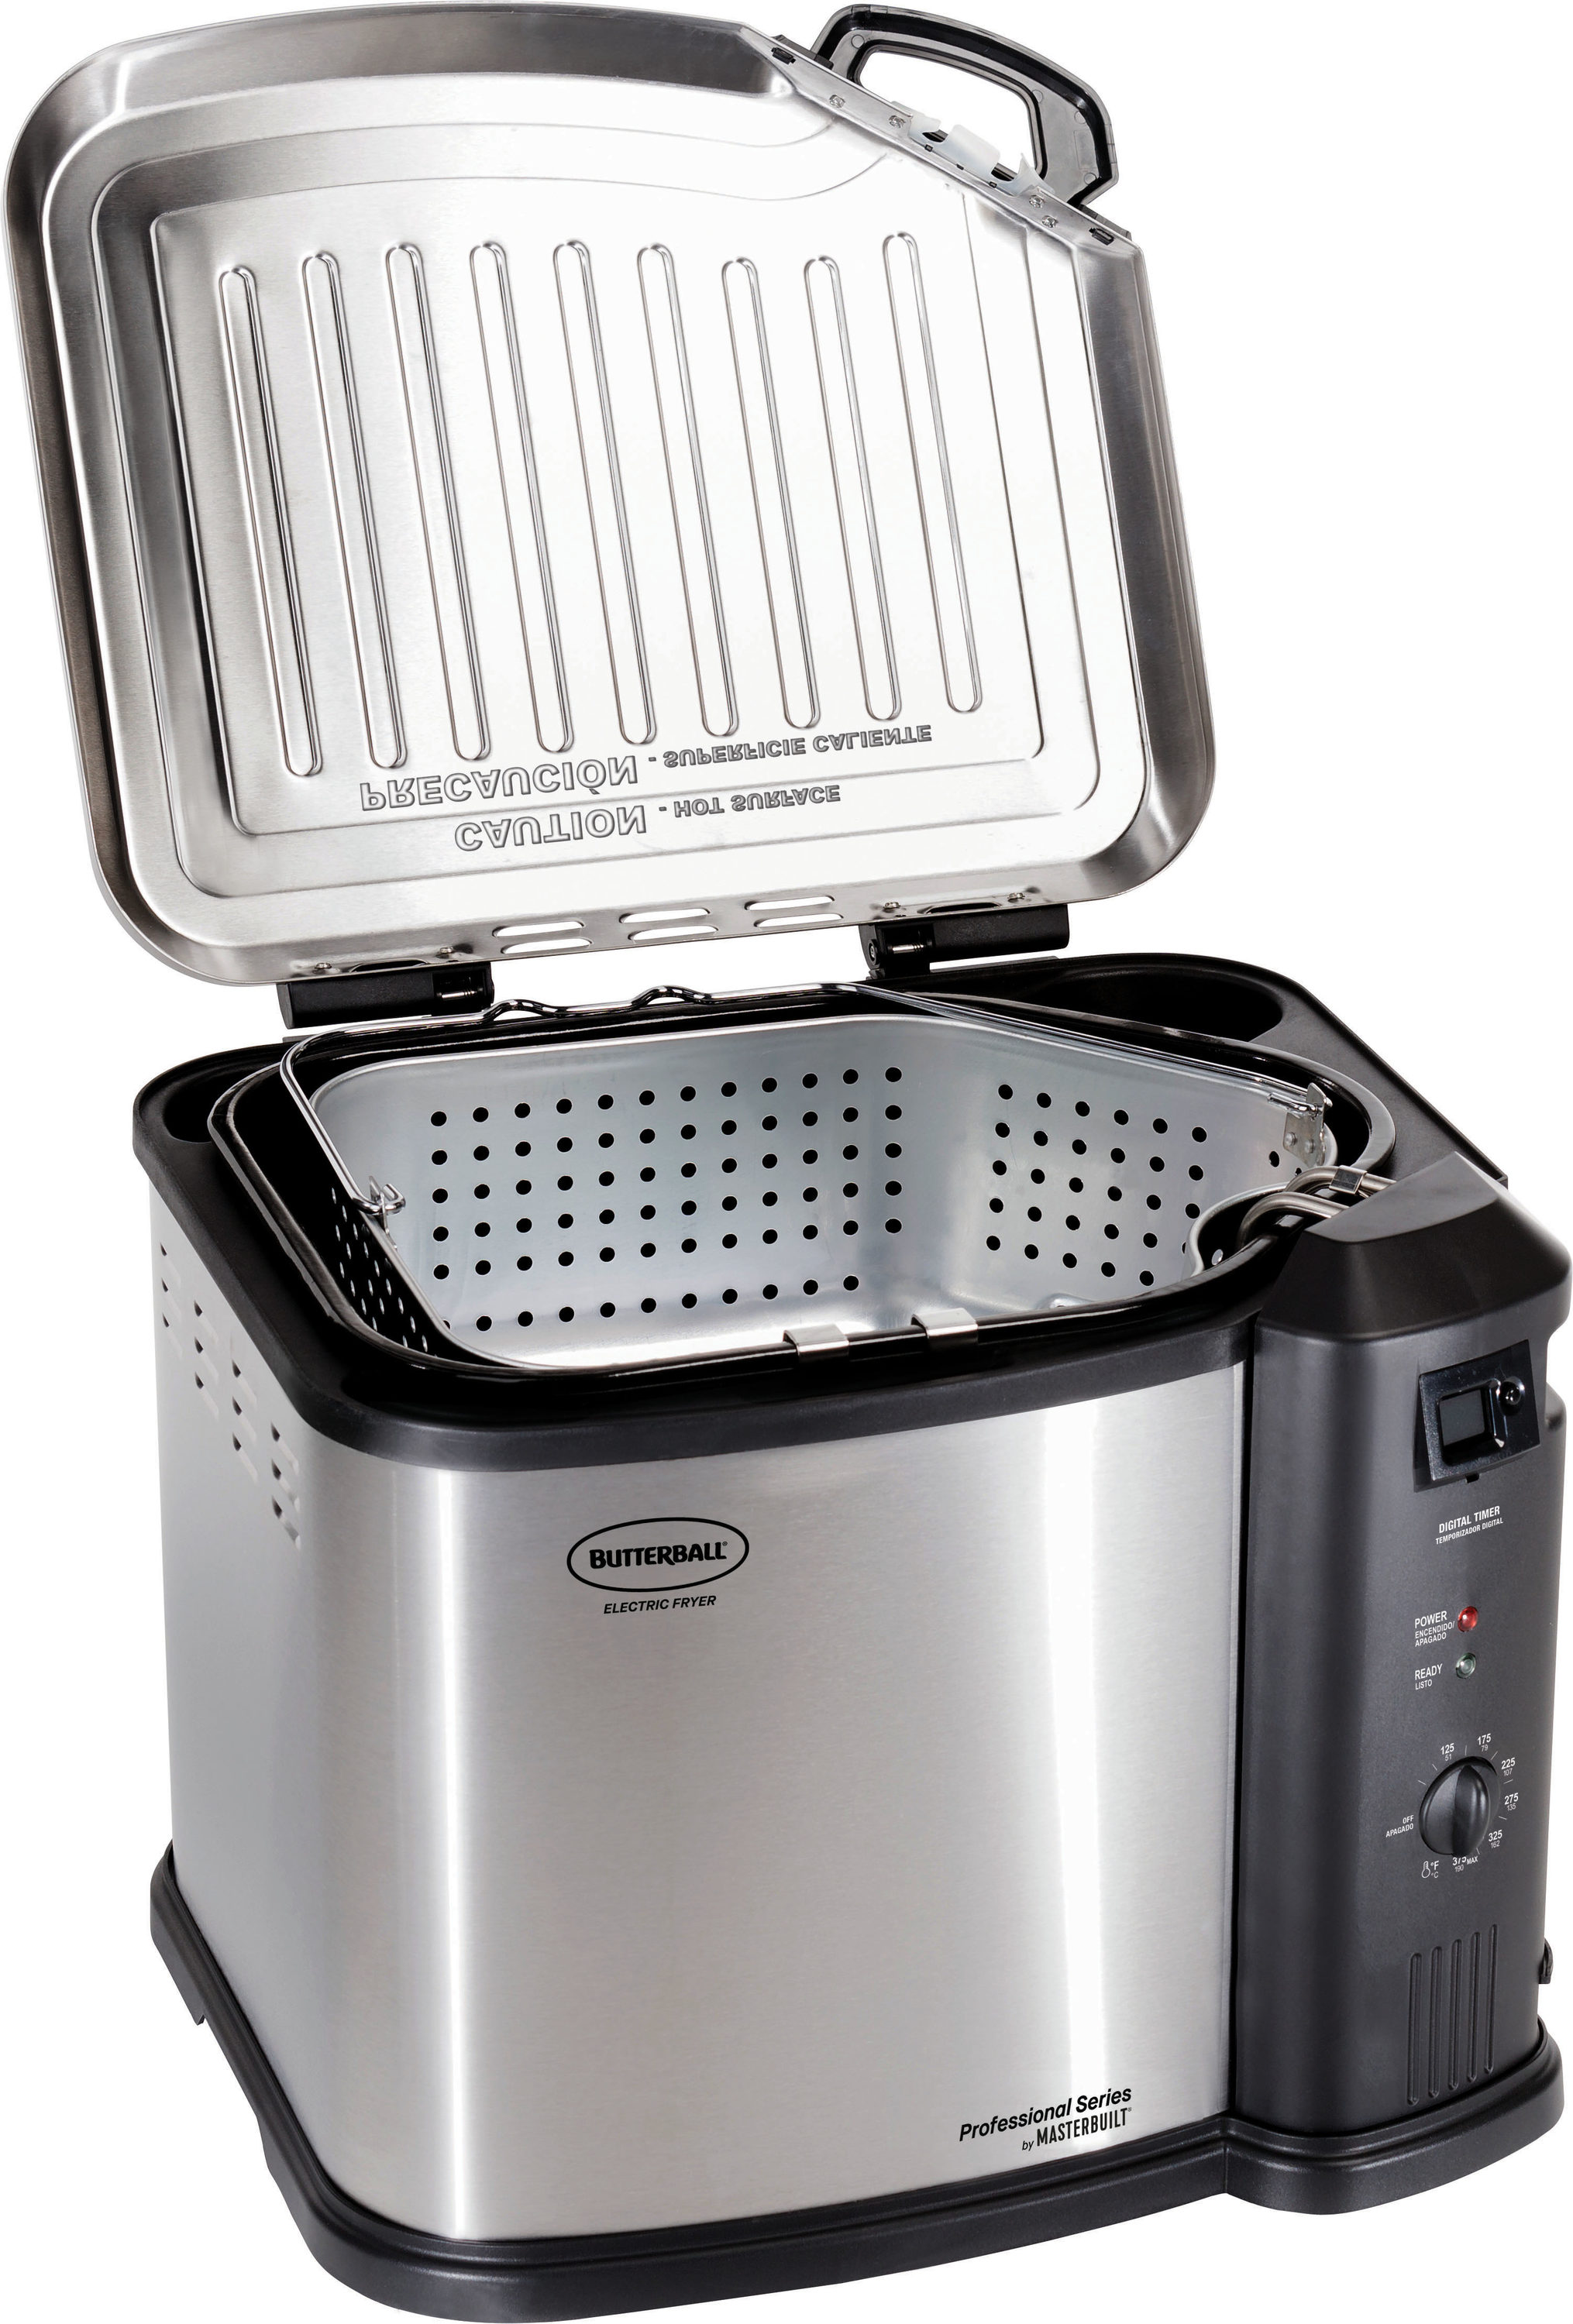 Butterball 8-Quart Ignition Electric Turkey Fryer at